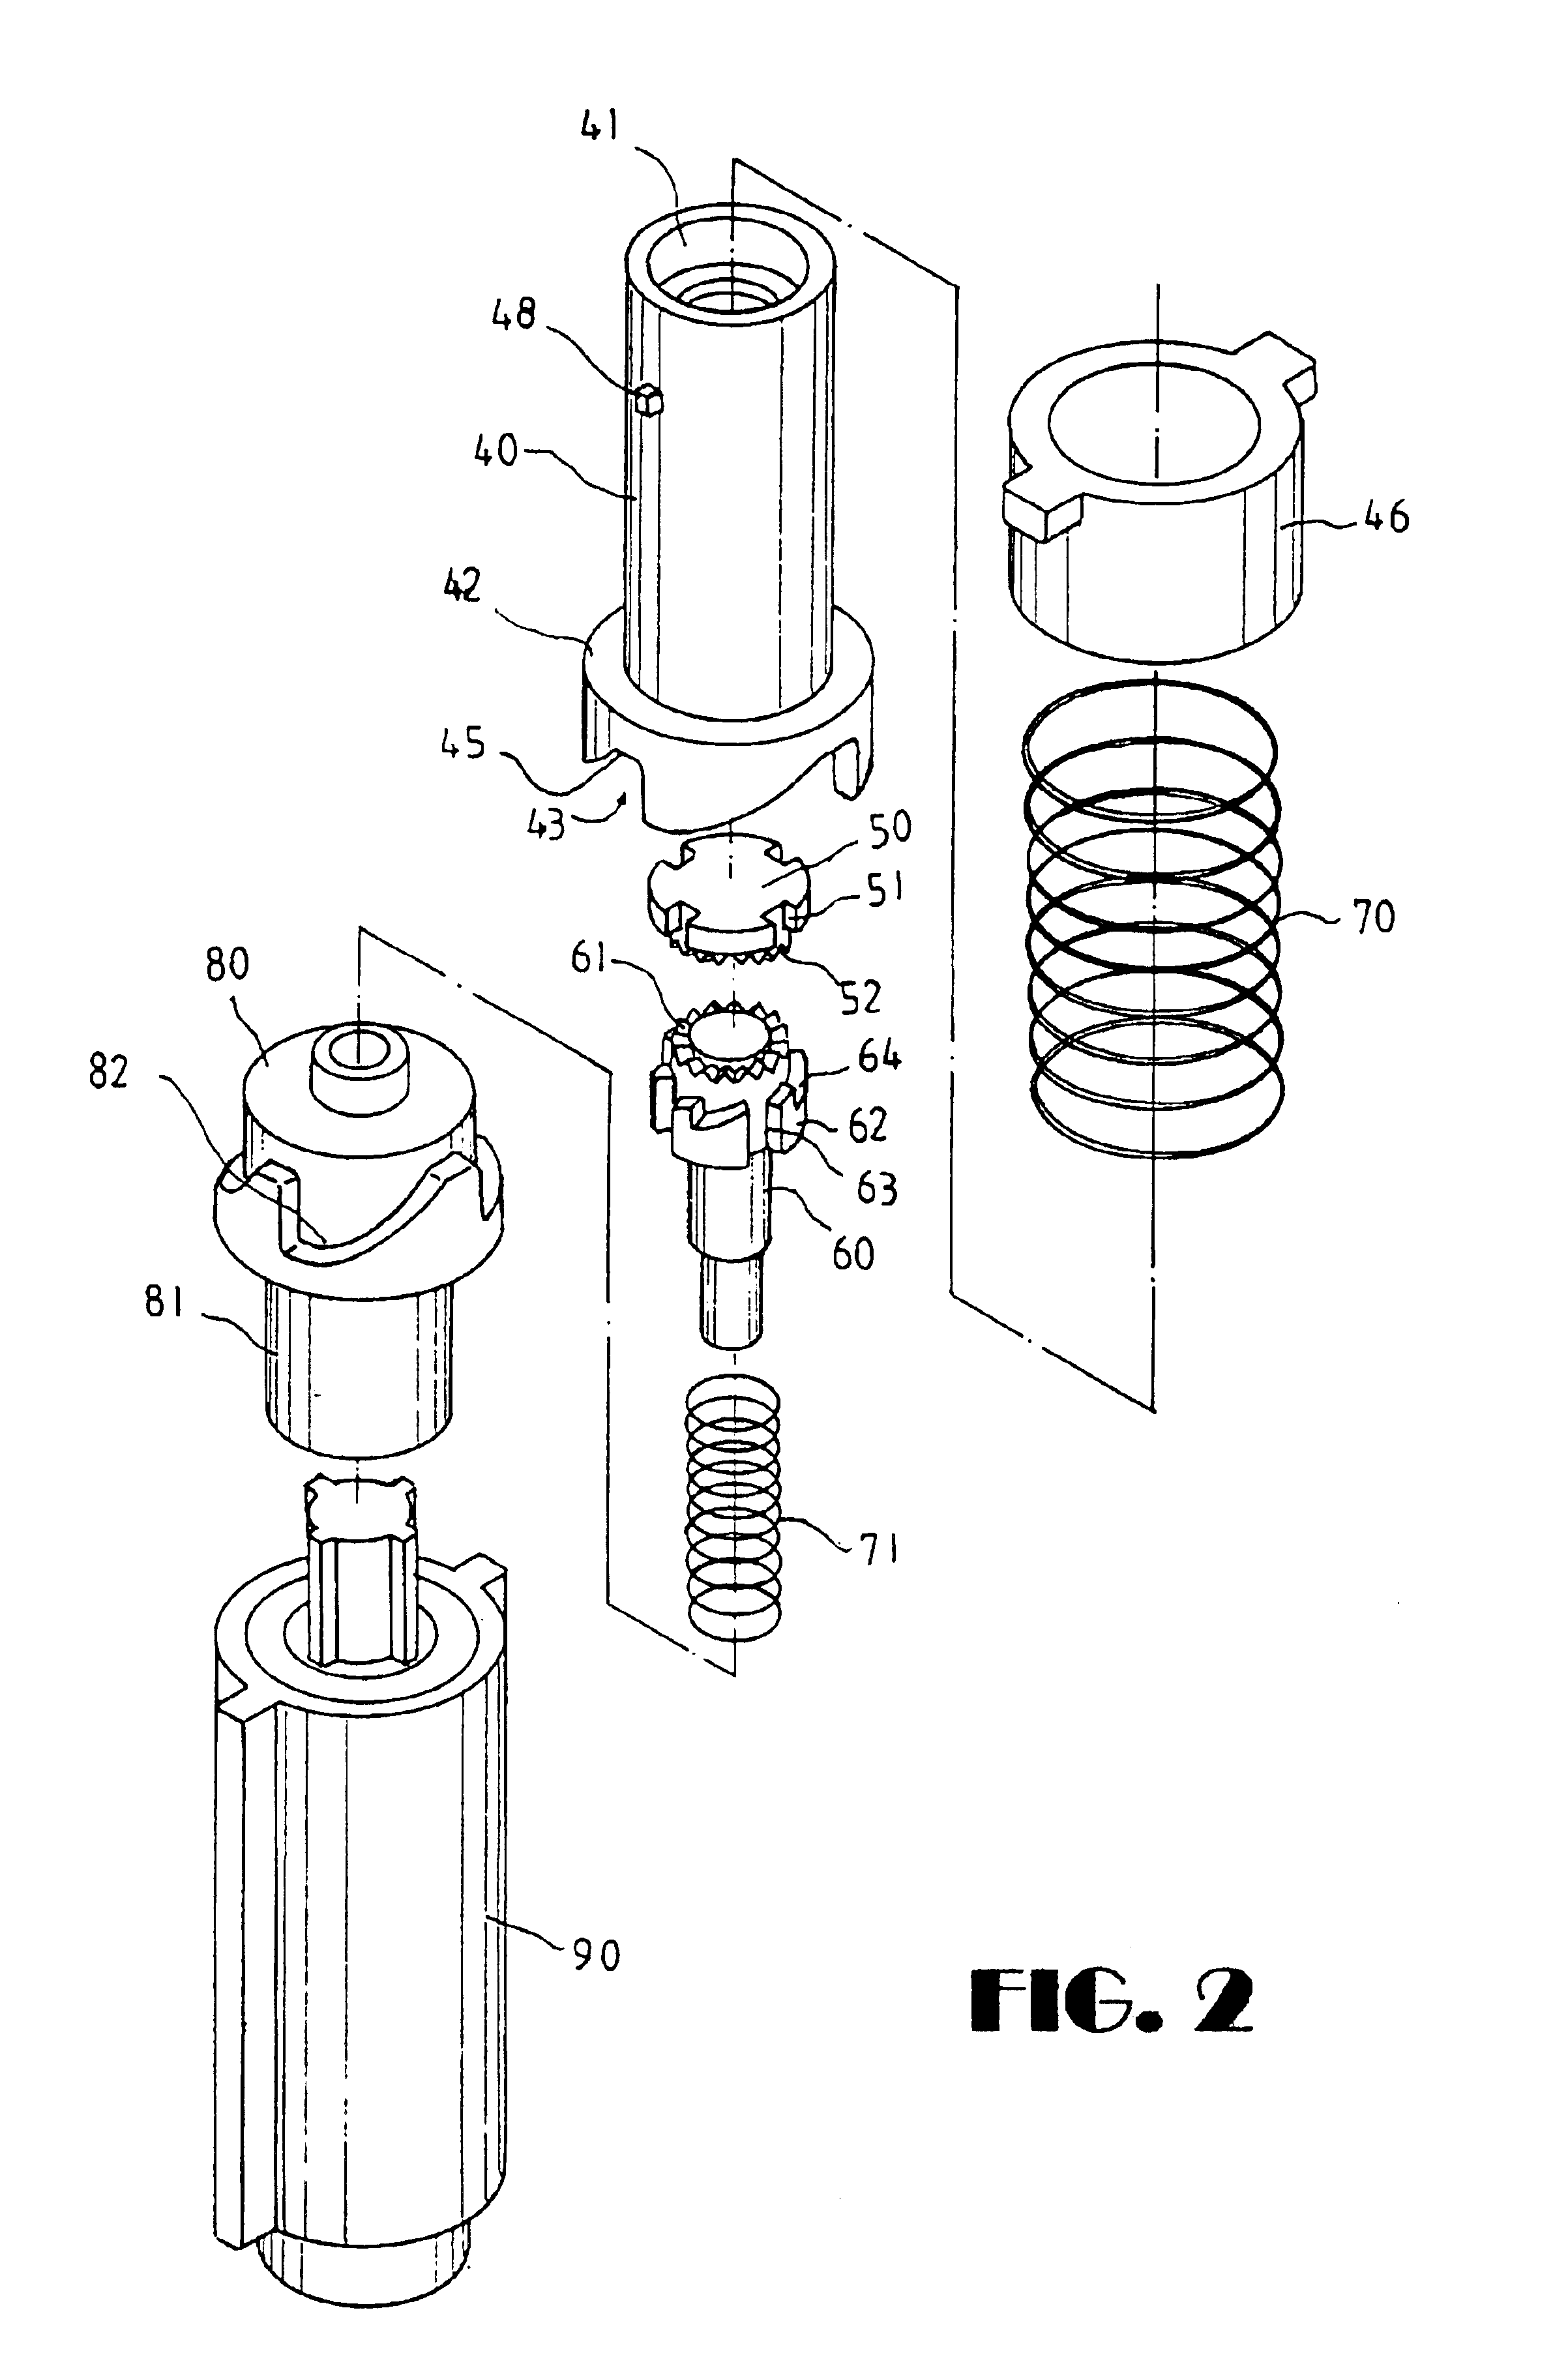 Combination lock capable of being opened by a key or inhibited the same